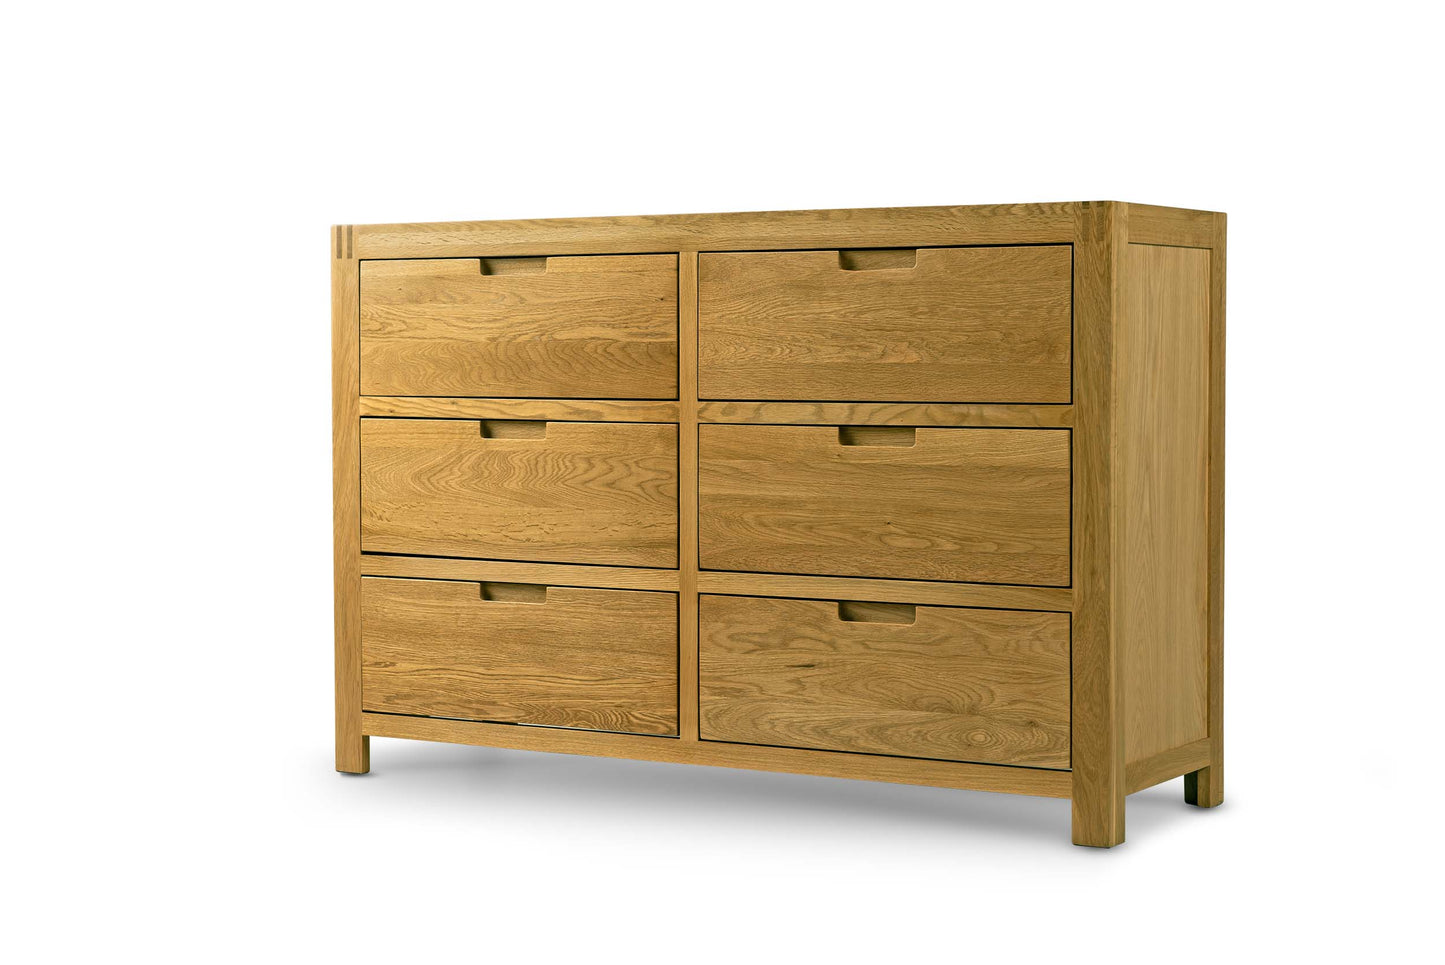 6 Drawer Chest of Drawers - Square Style - Natural Oak